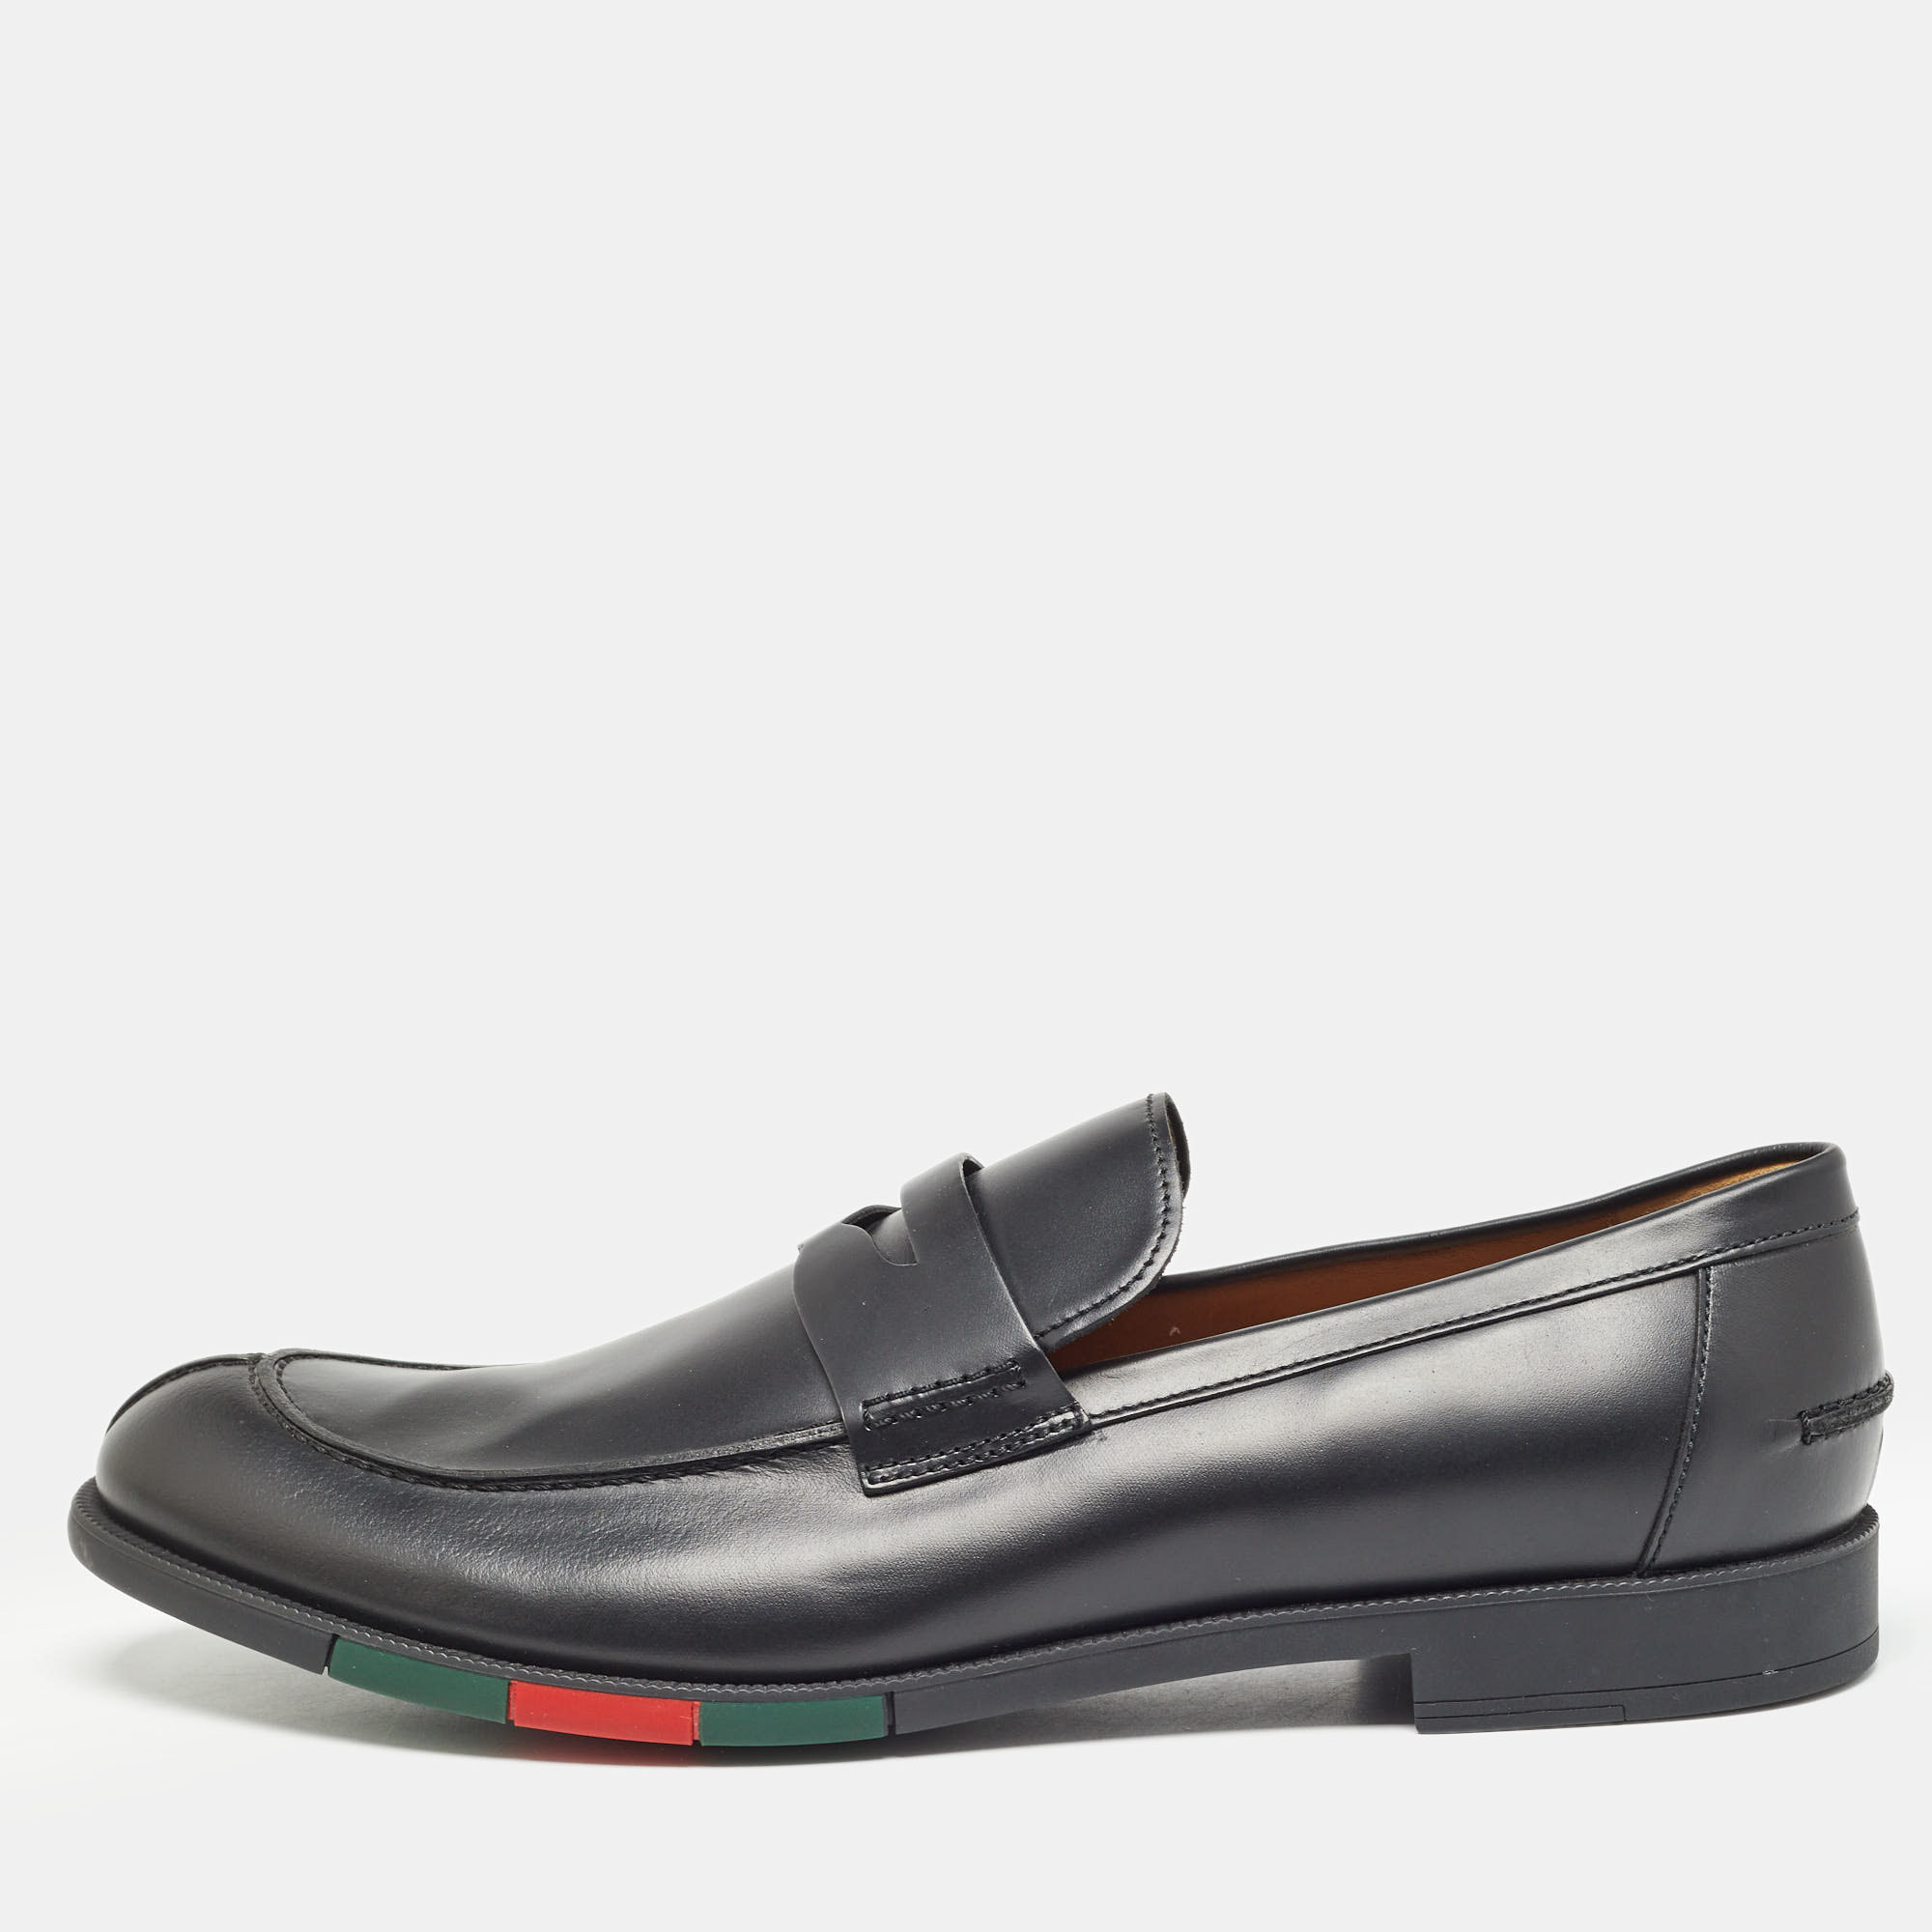 Pre-owned Gucci Black Leather Penny Slip On Loafers Size 45.5